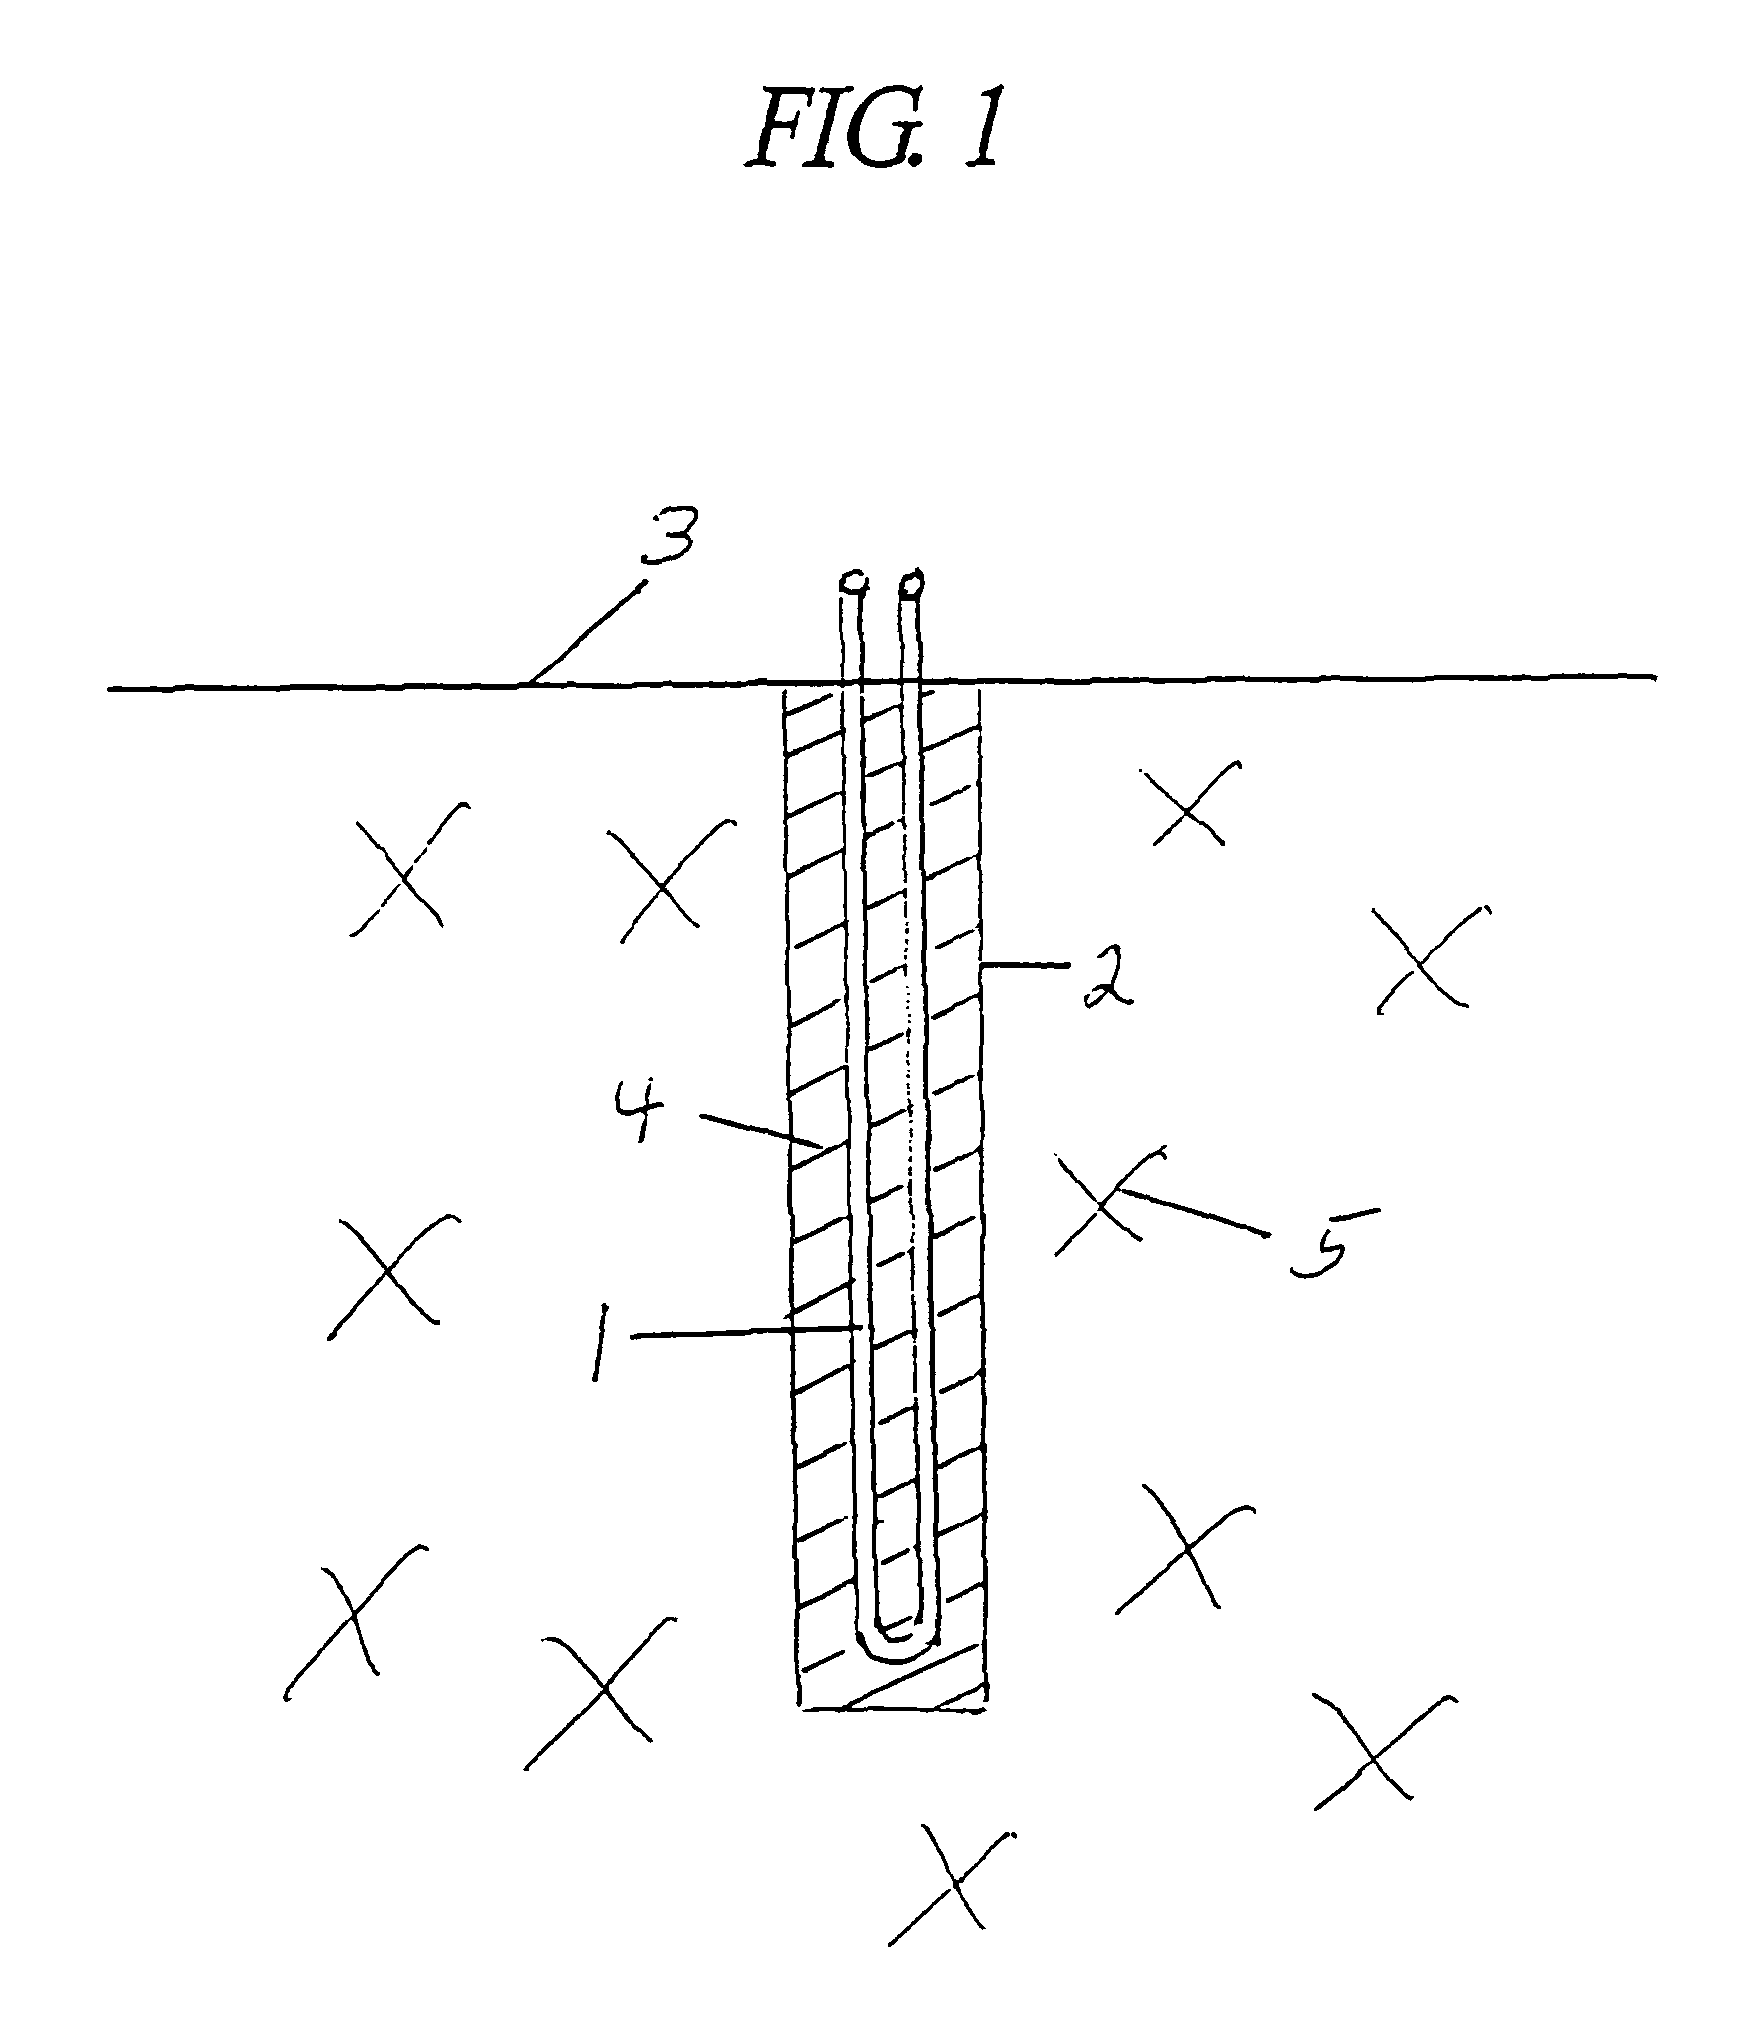 Cementitious grout and methods of using same